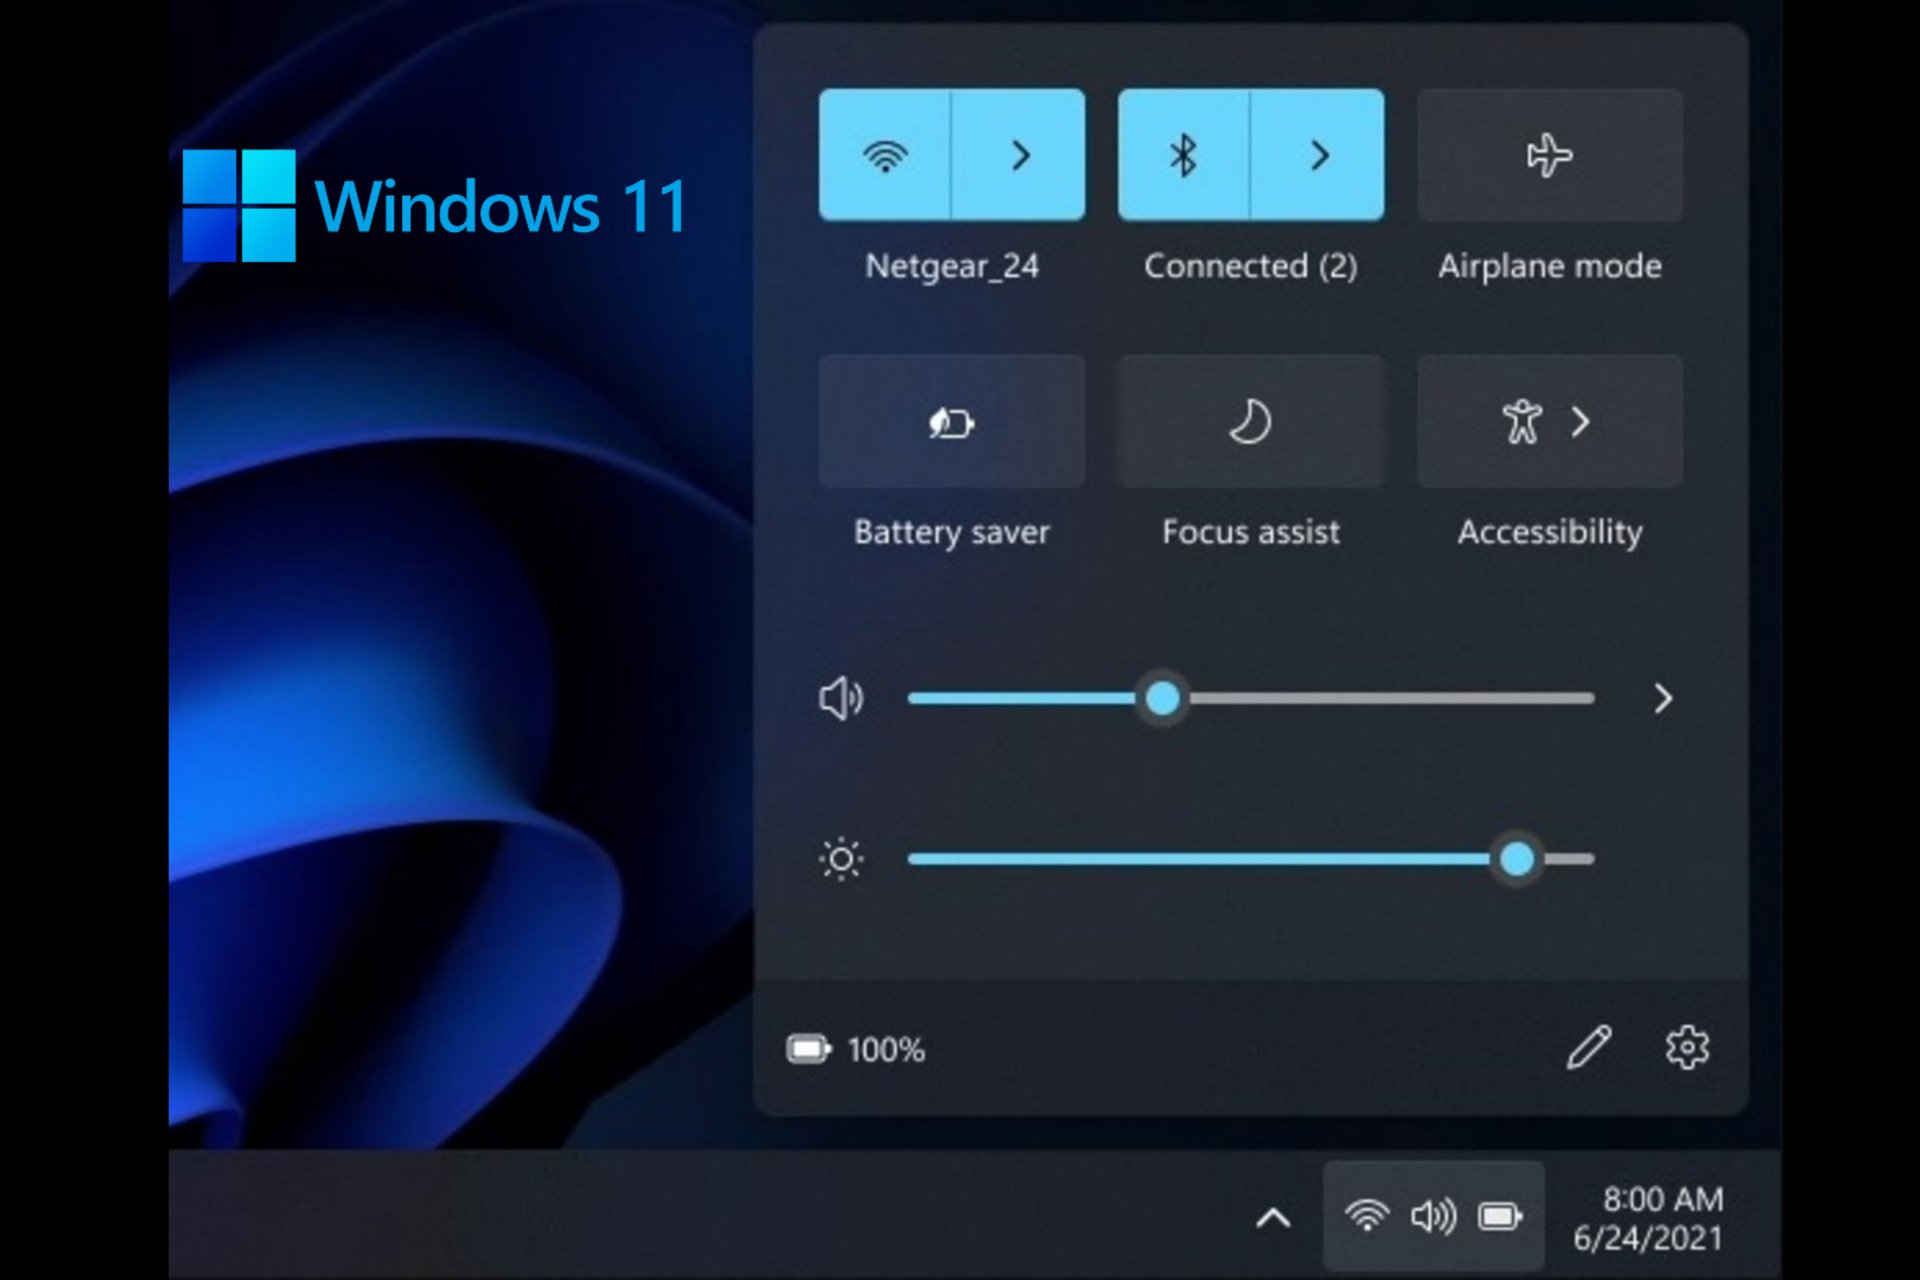 How to customize Action Center in Windows 11 [Full Guide]